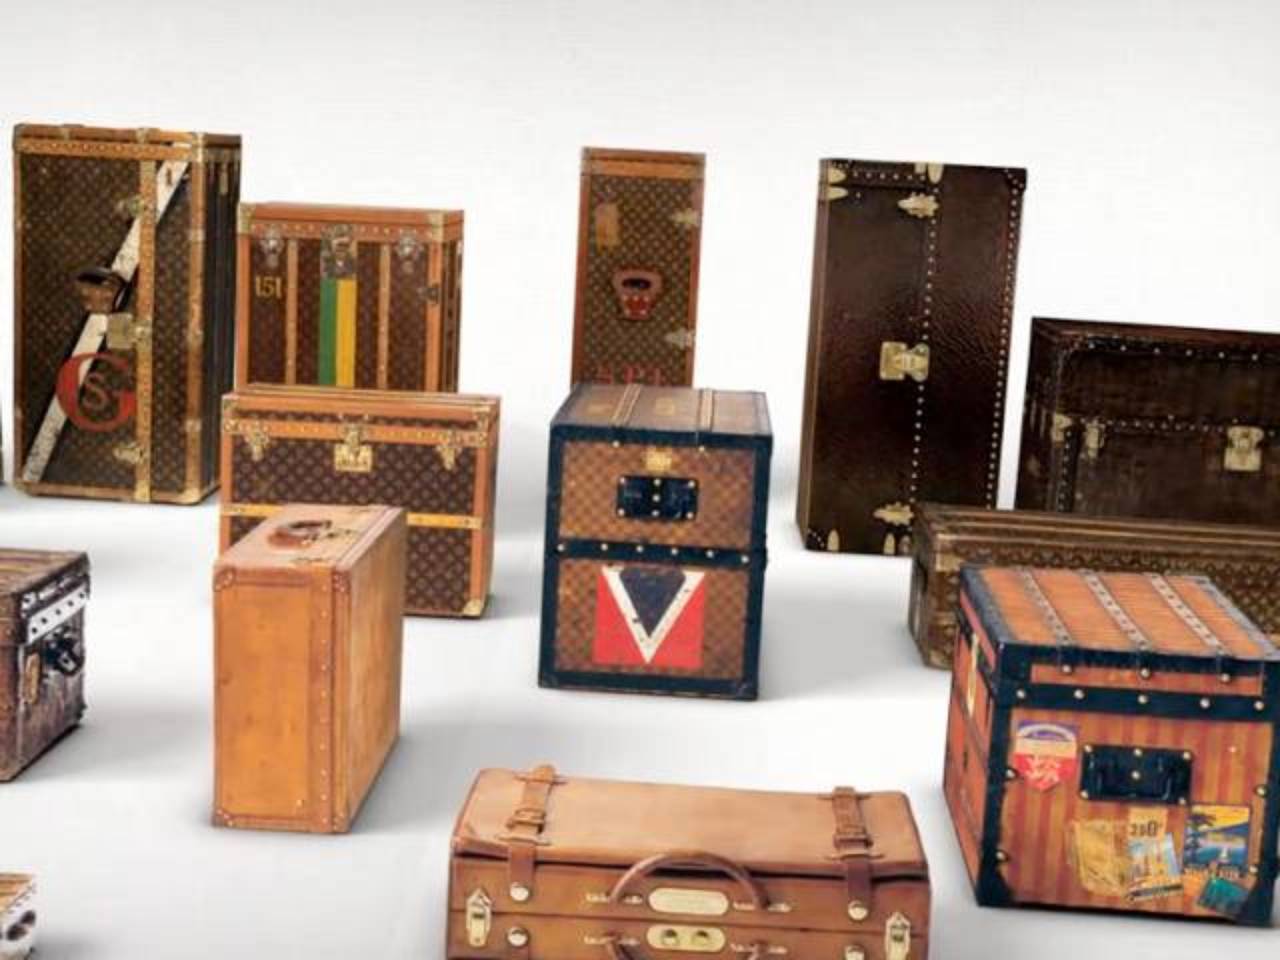 Louis Vuitton: 100 Legendary Trunks - French Version - Other - Books and  Stationery R07146